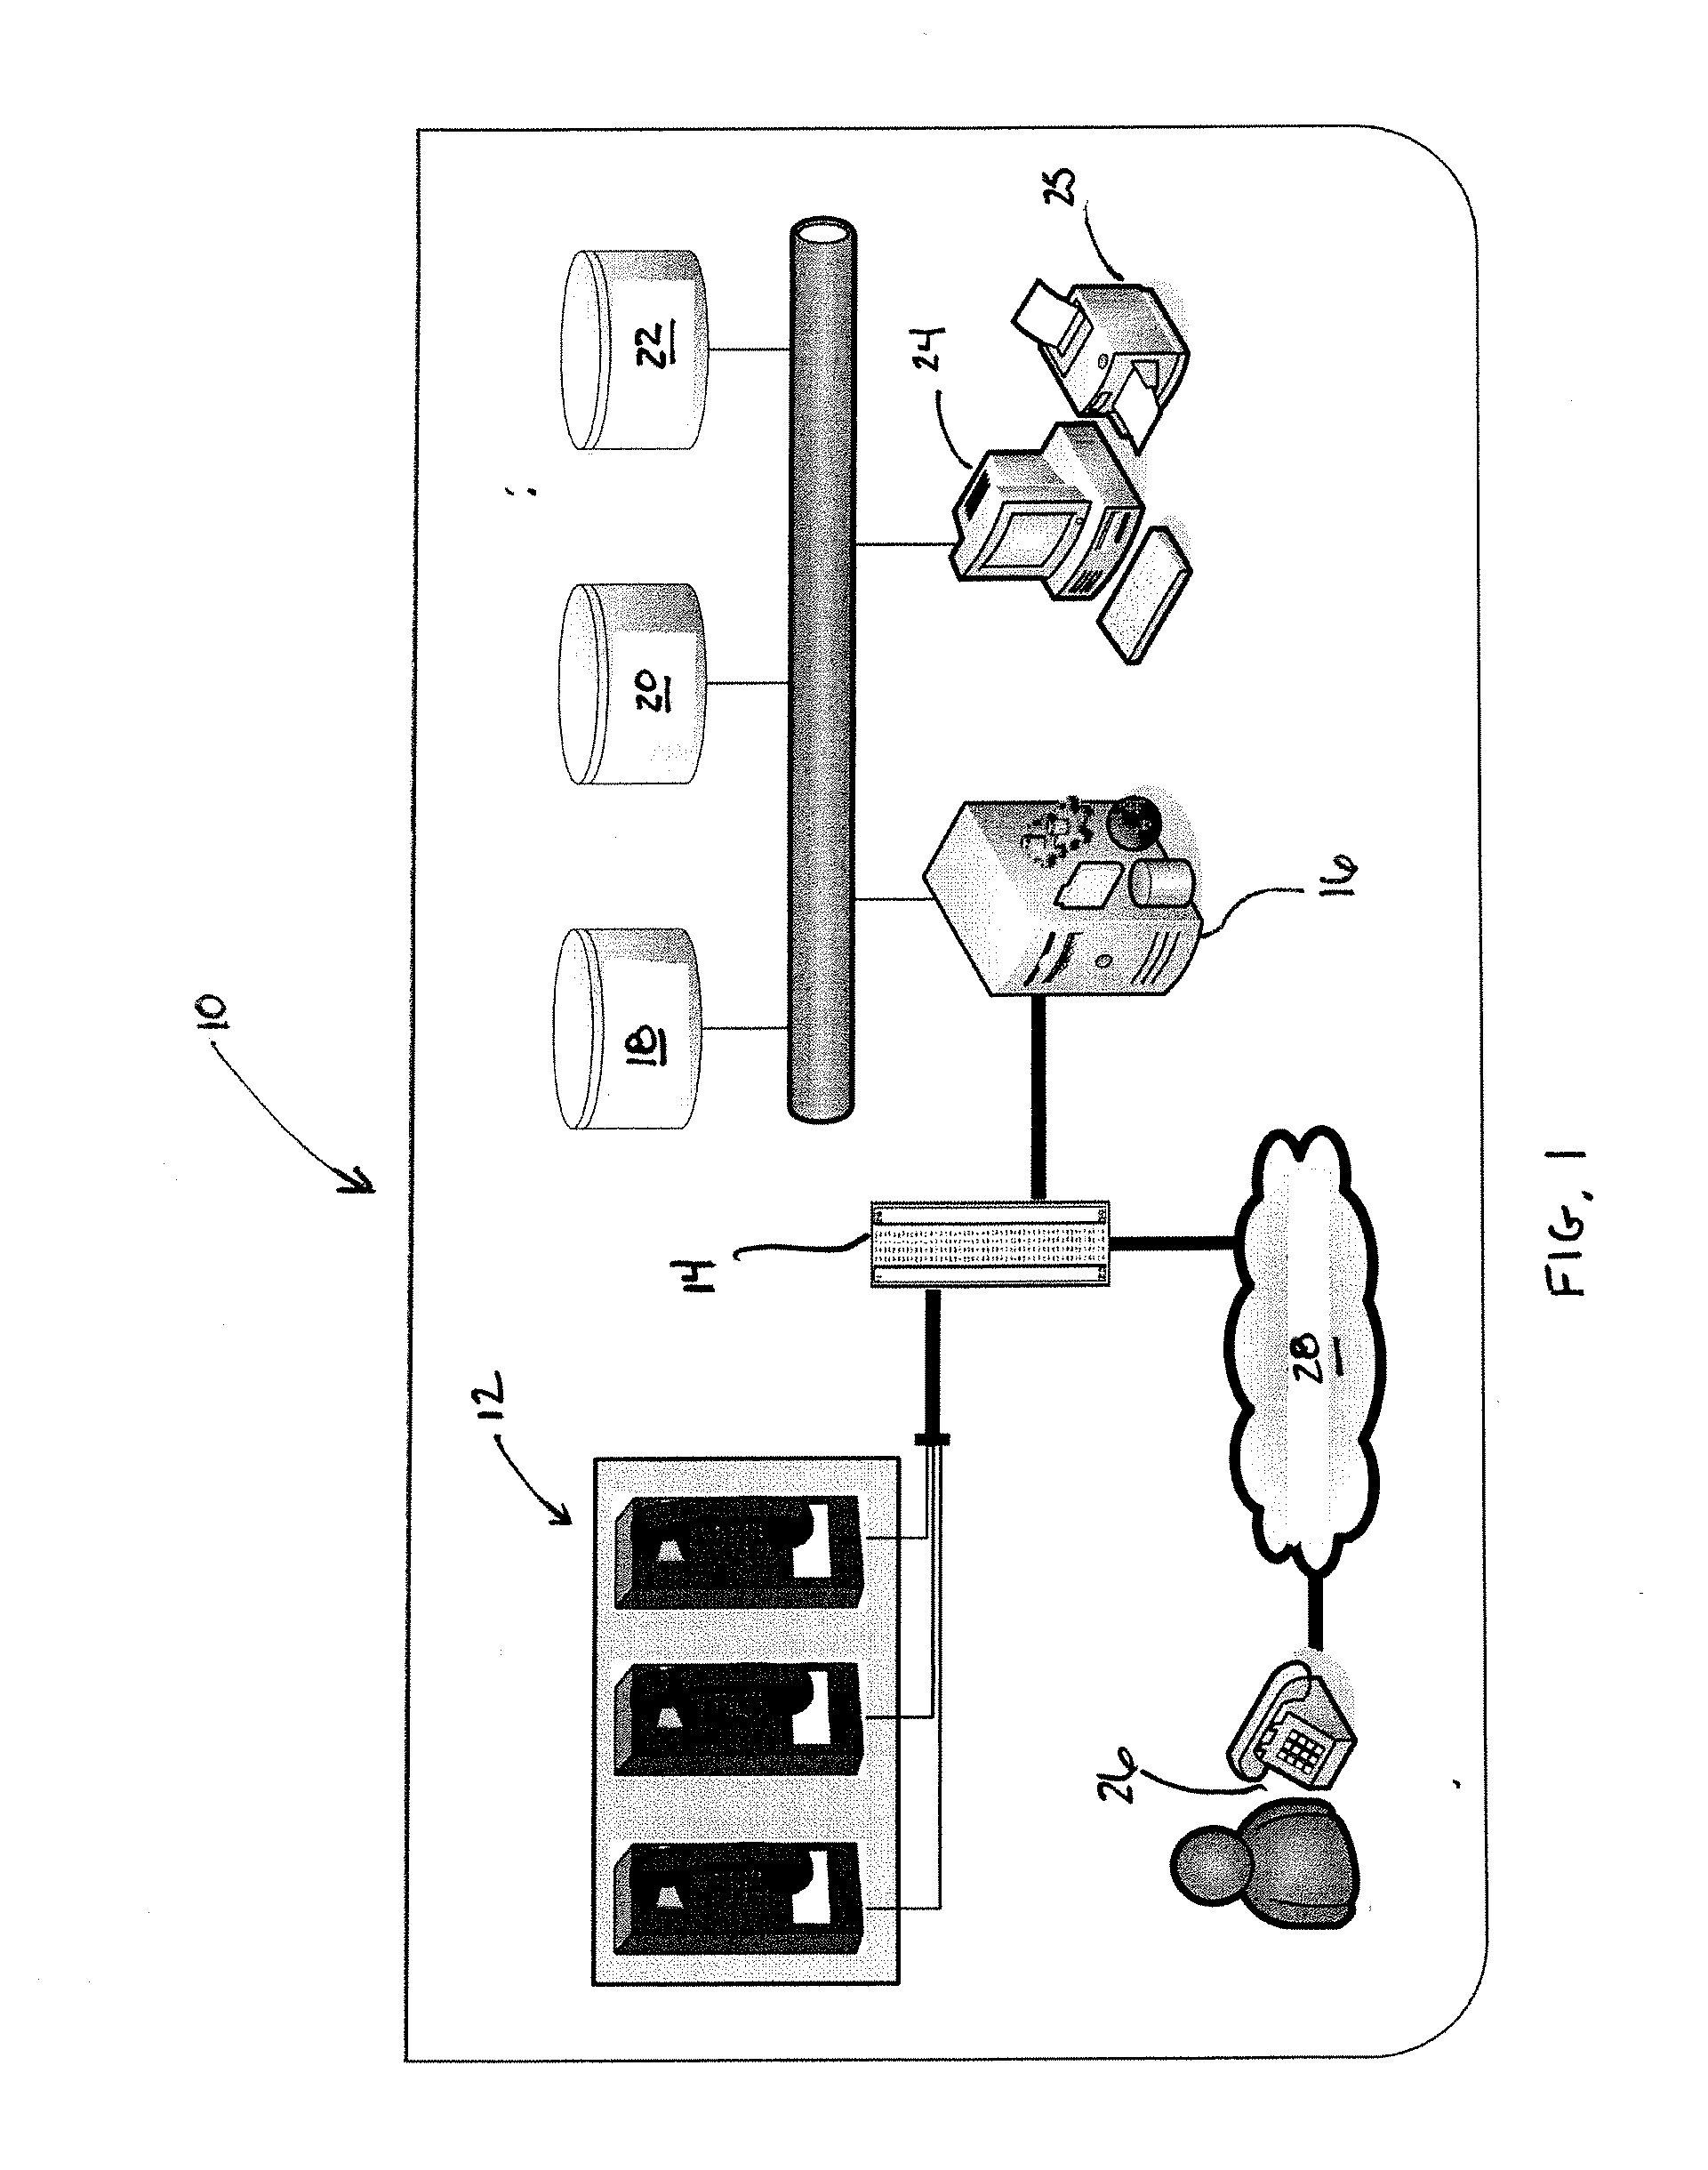 System and method for controlling free phone calls through an institutional phone system